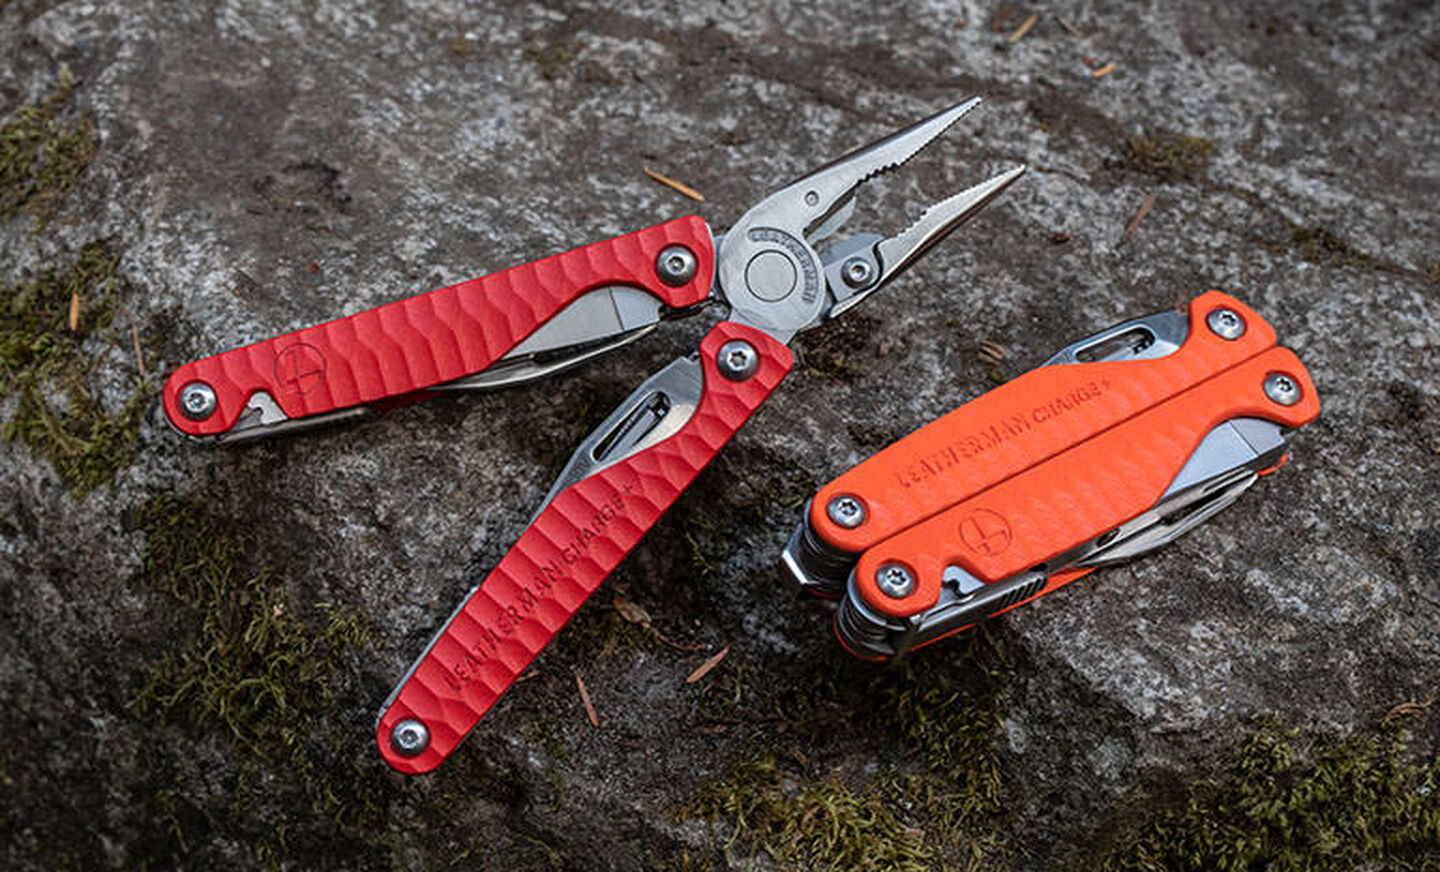 An open red Leatherman Charge+ G10 multi-tool laying on a rock next to a closed orange Leatherman Charge+ G10 multi-tool